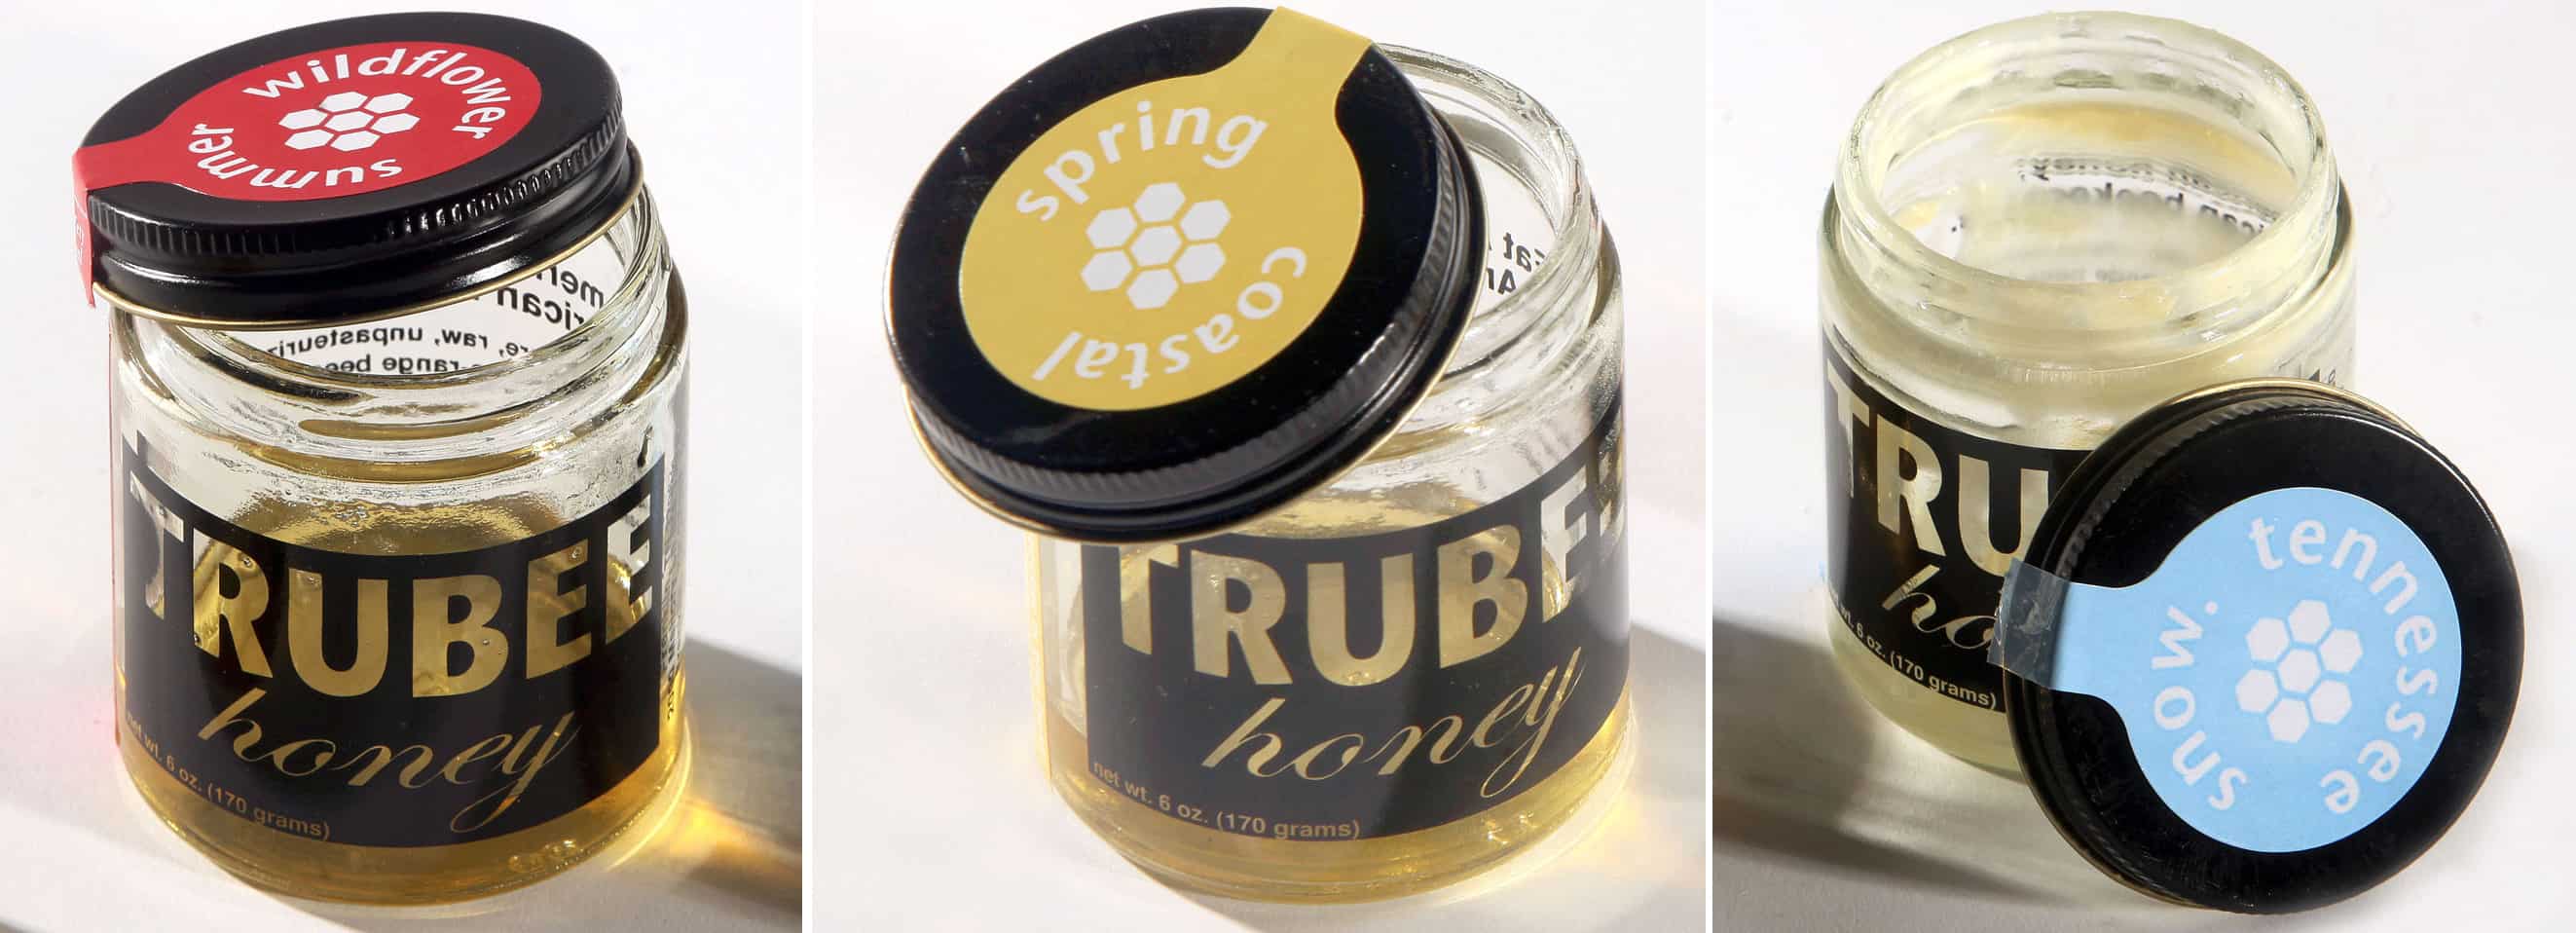 TruBee Raw Seasonal Honey Different Limited Edition Vintage Flavors